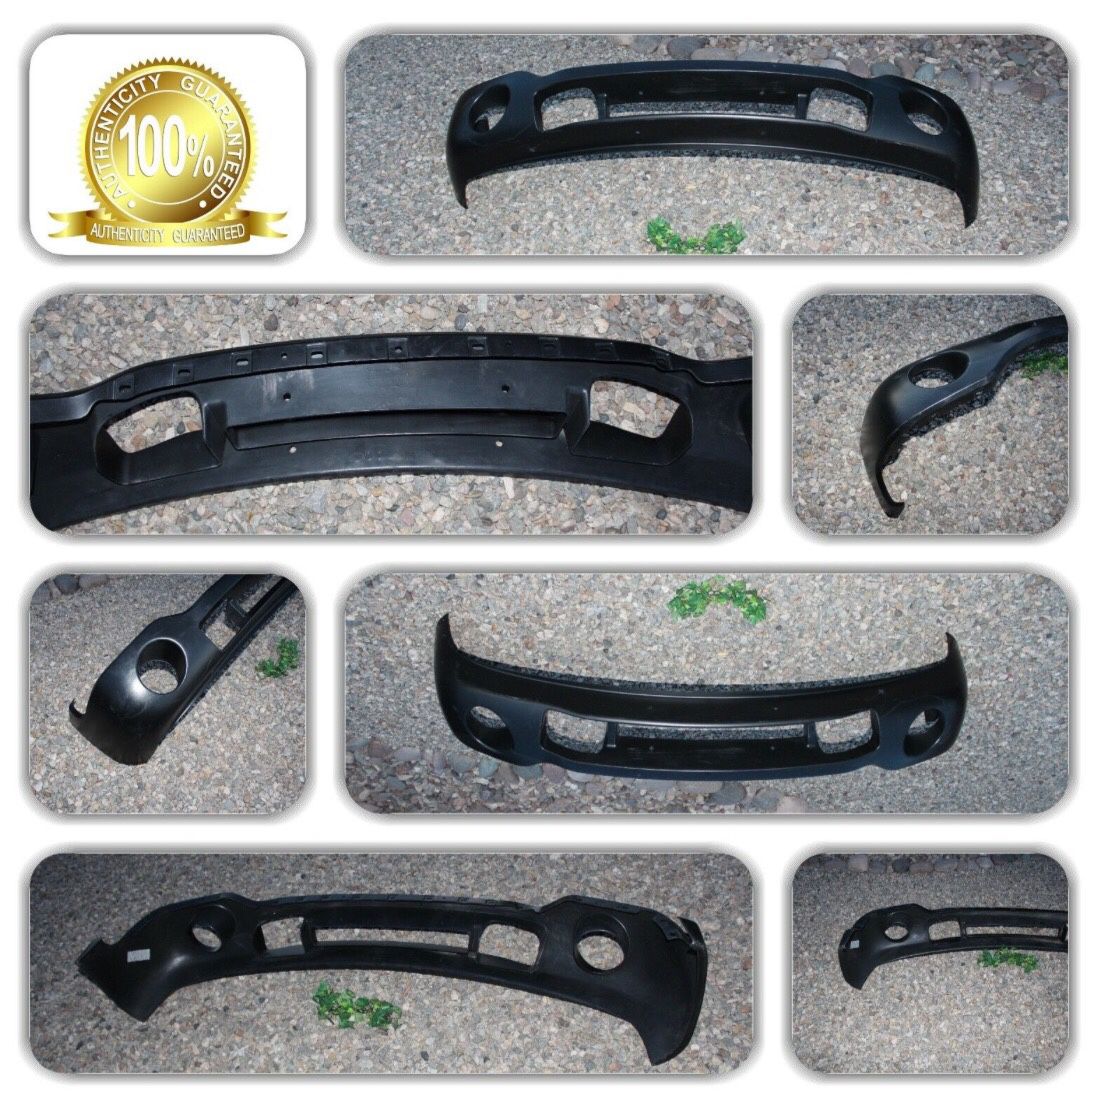 PRIMED FRONT BUMPER REPLACEMENT COVER FOR 2003-2007 GMC SIERRA!